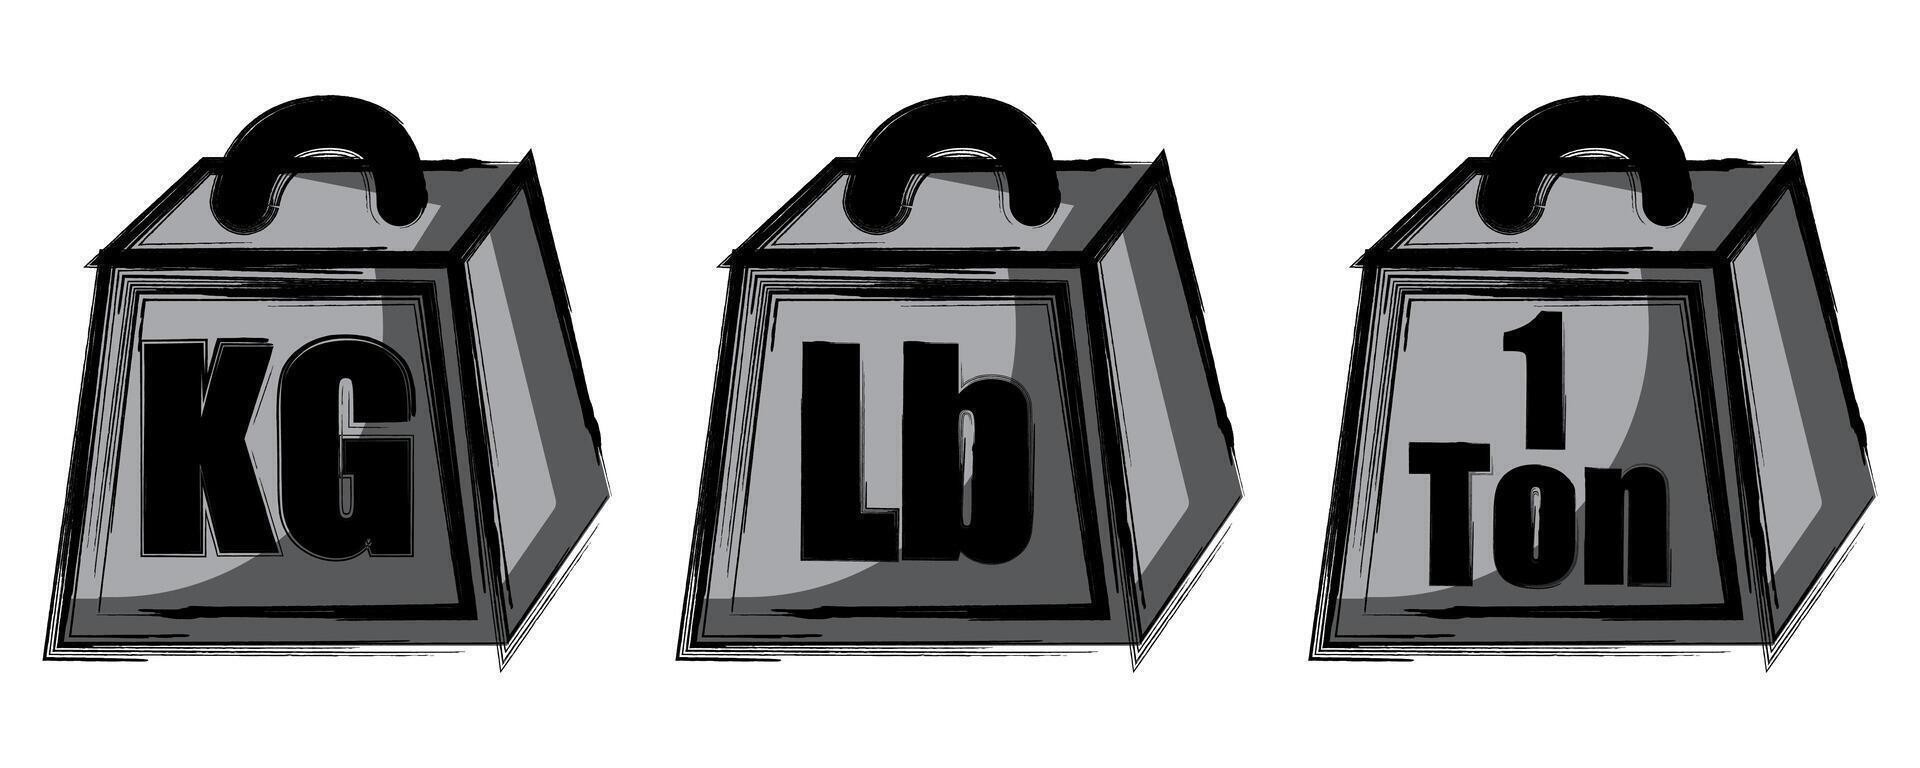 Cartoon style black and white weights in KG, Lb and 1 ton. Healthy living element or concept vector